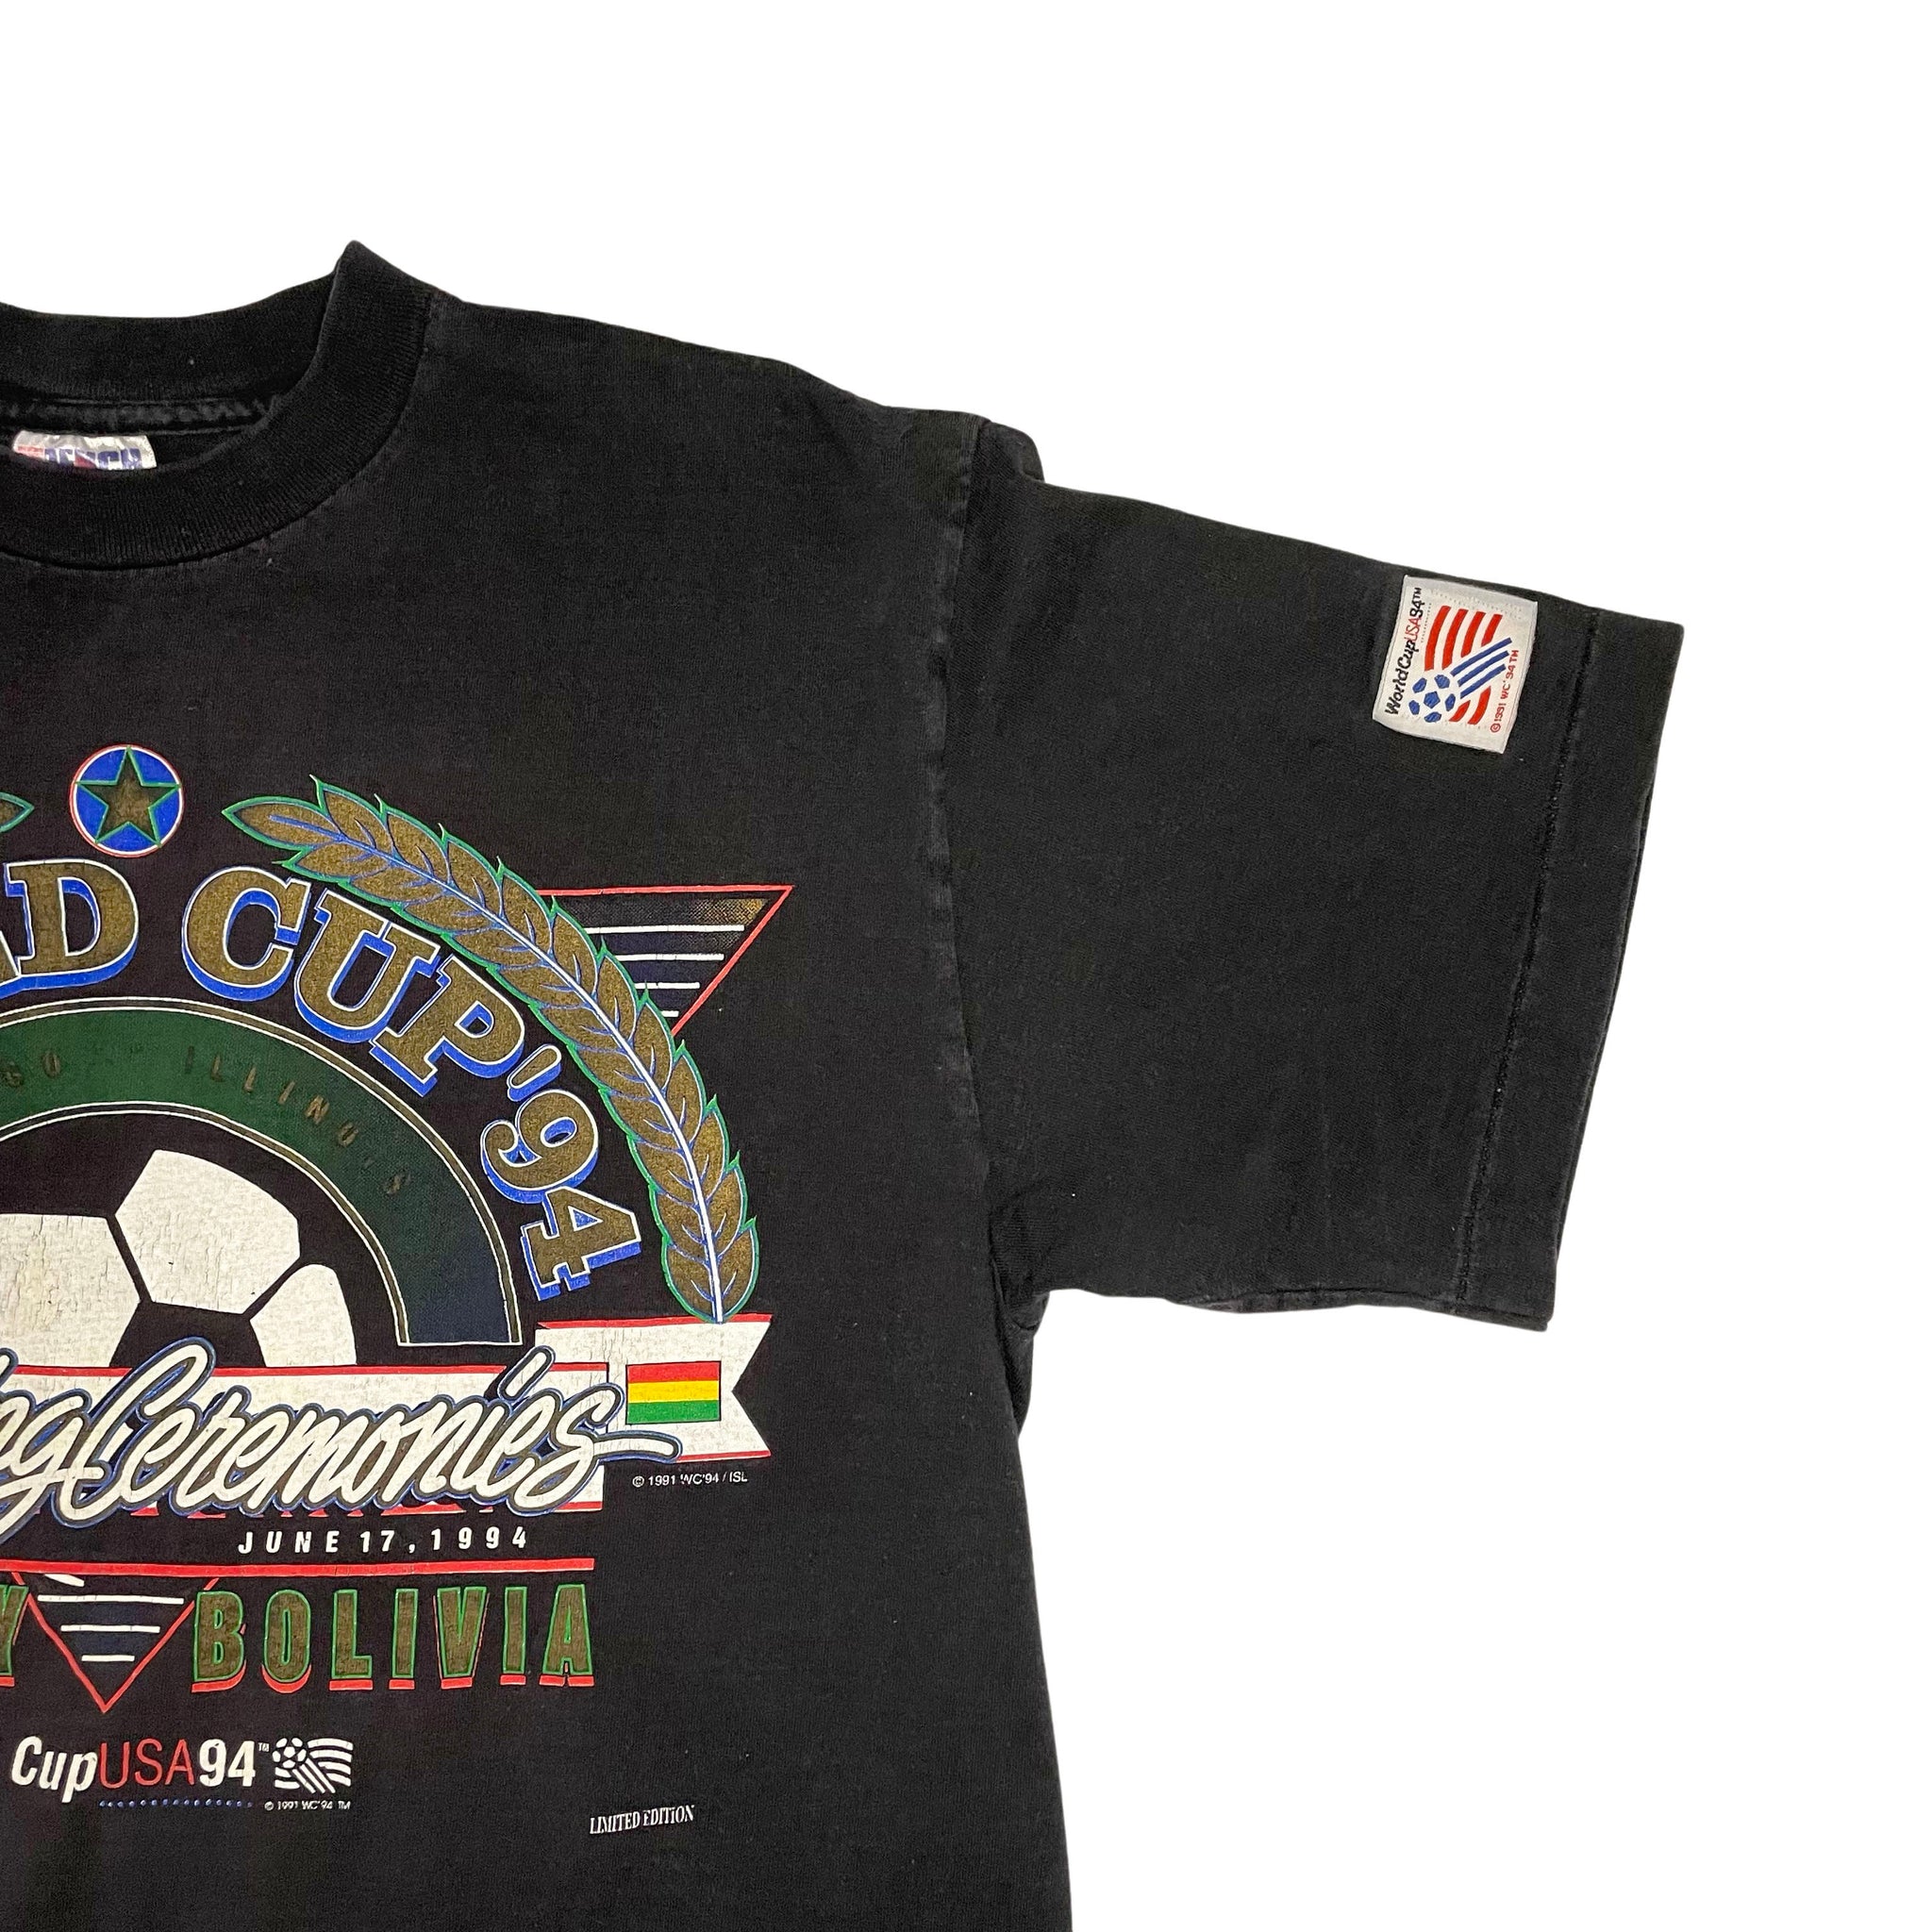 1994 World Cup Opening Ceremony T-Shirt - L